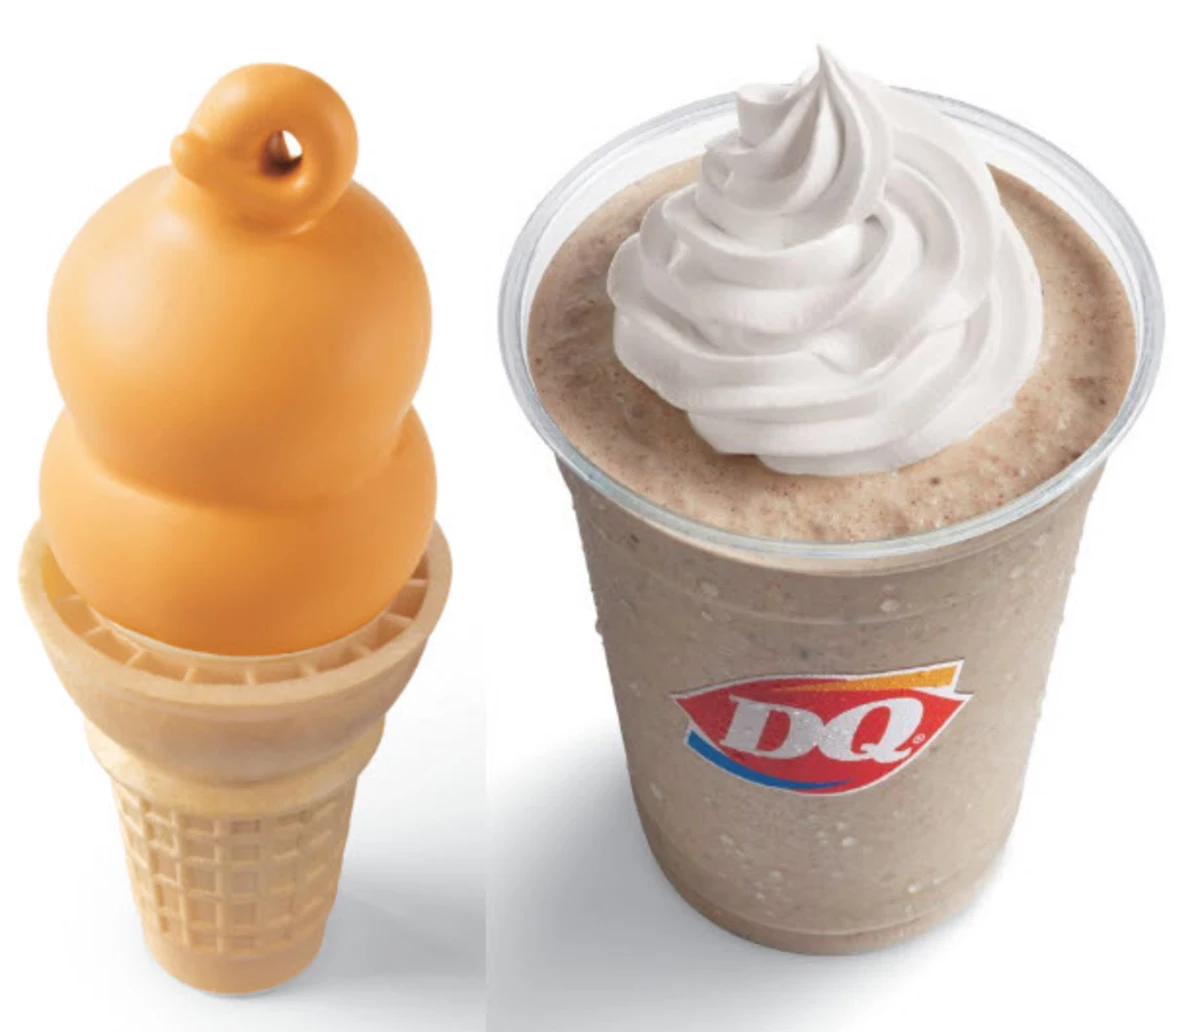 dairy-queen-announces-fall-shake-and-dipped-cone-flavors